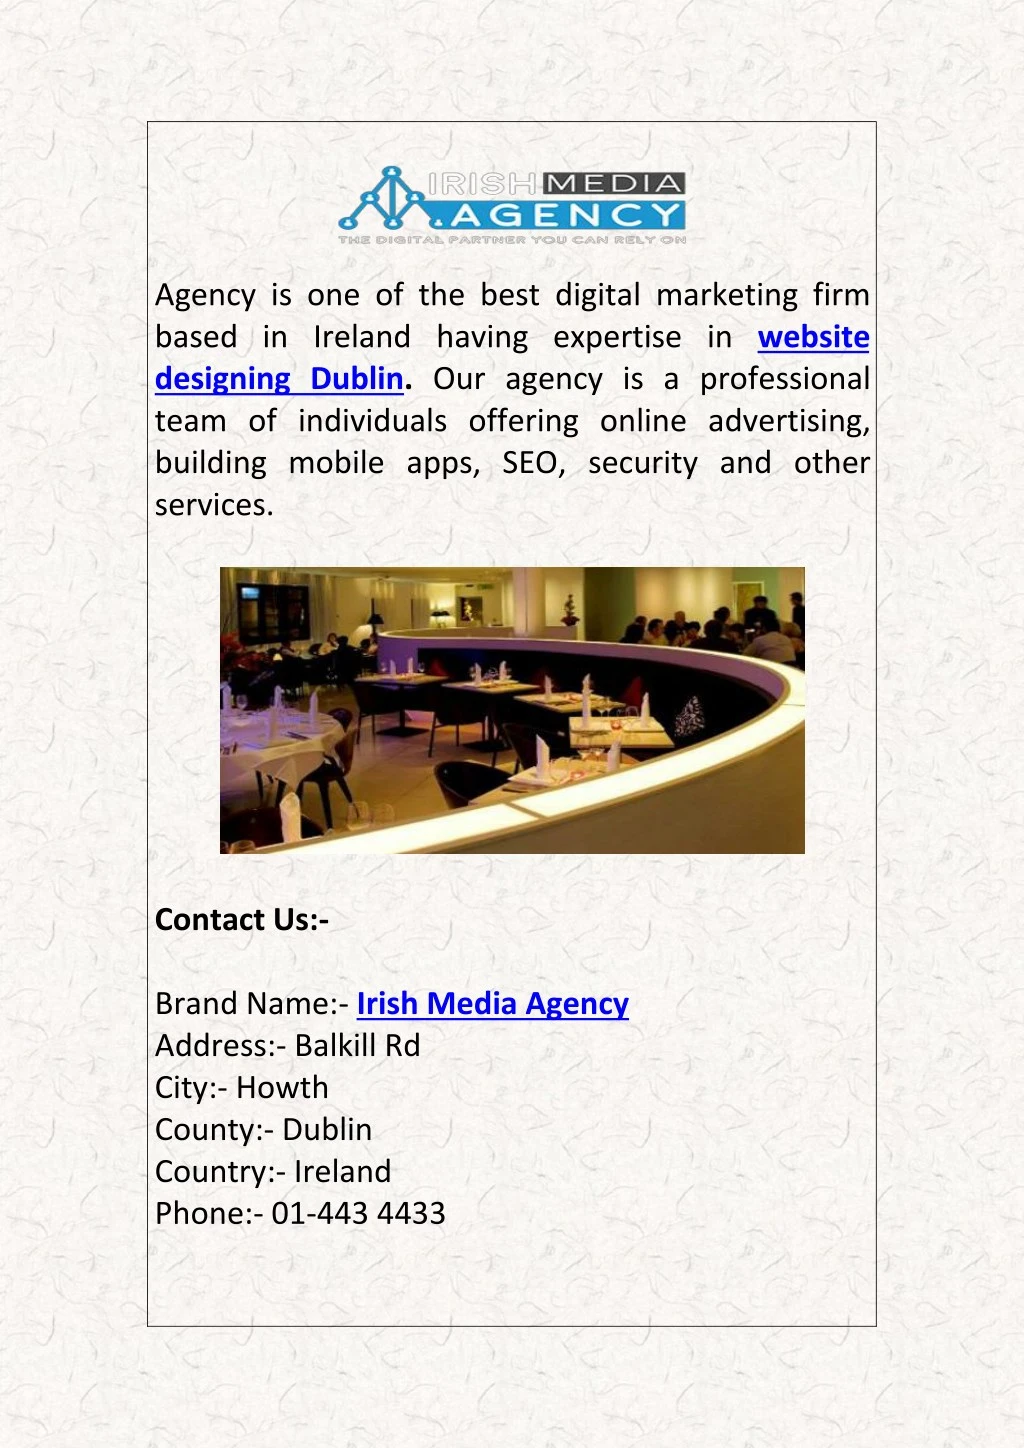 agency is one of the best digital marketing firm